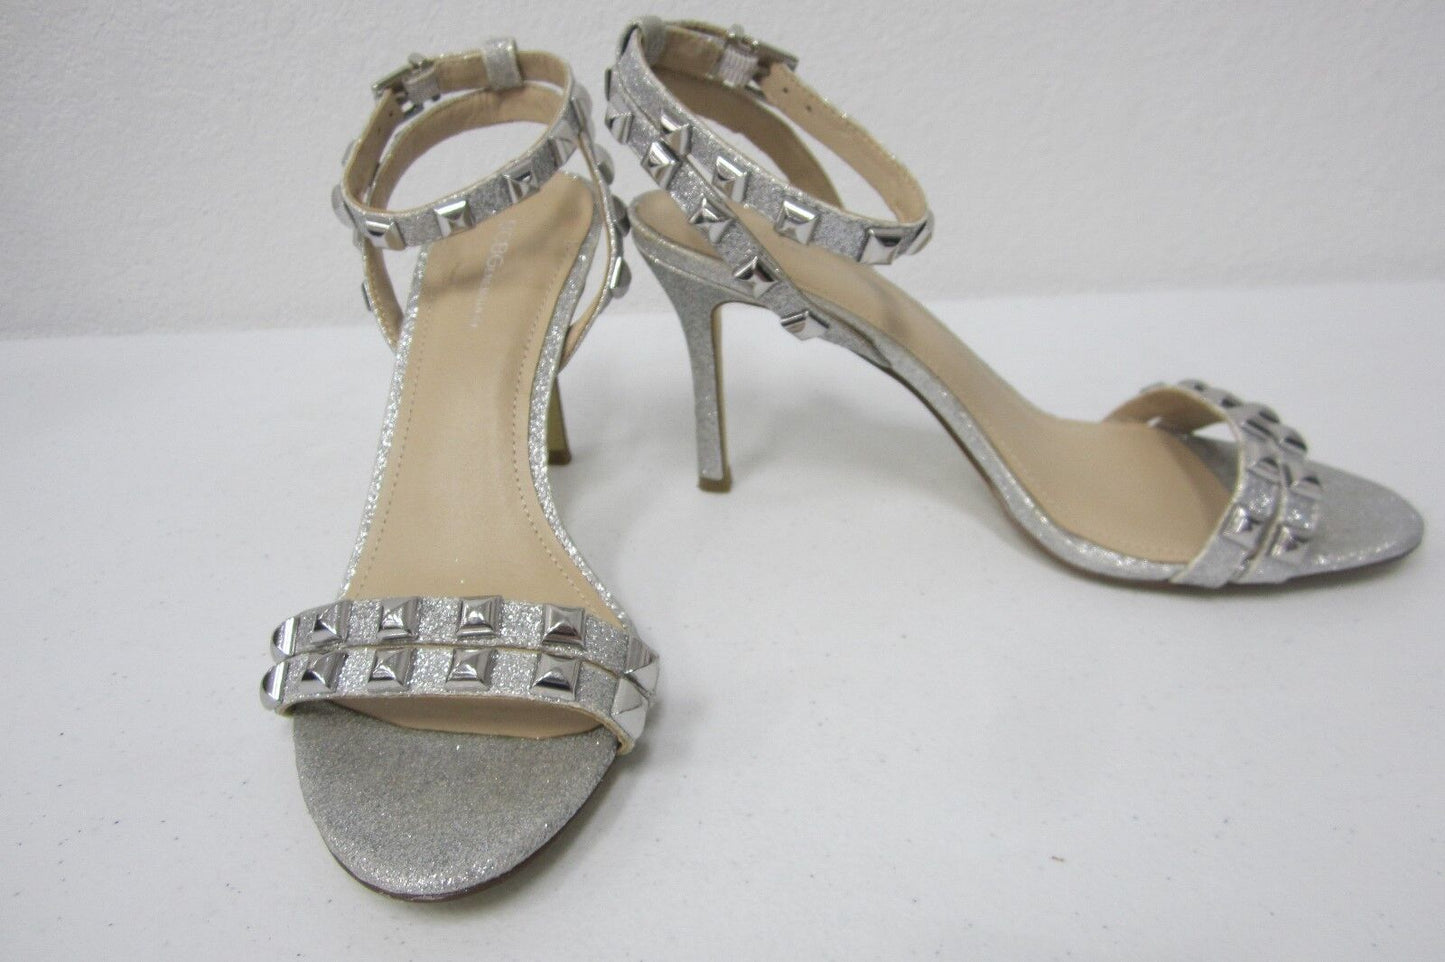 BCBGeneration Dacotah-X Glitter Silver Leather Studded Ankle Strap Heels Size 8M